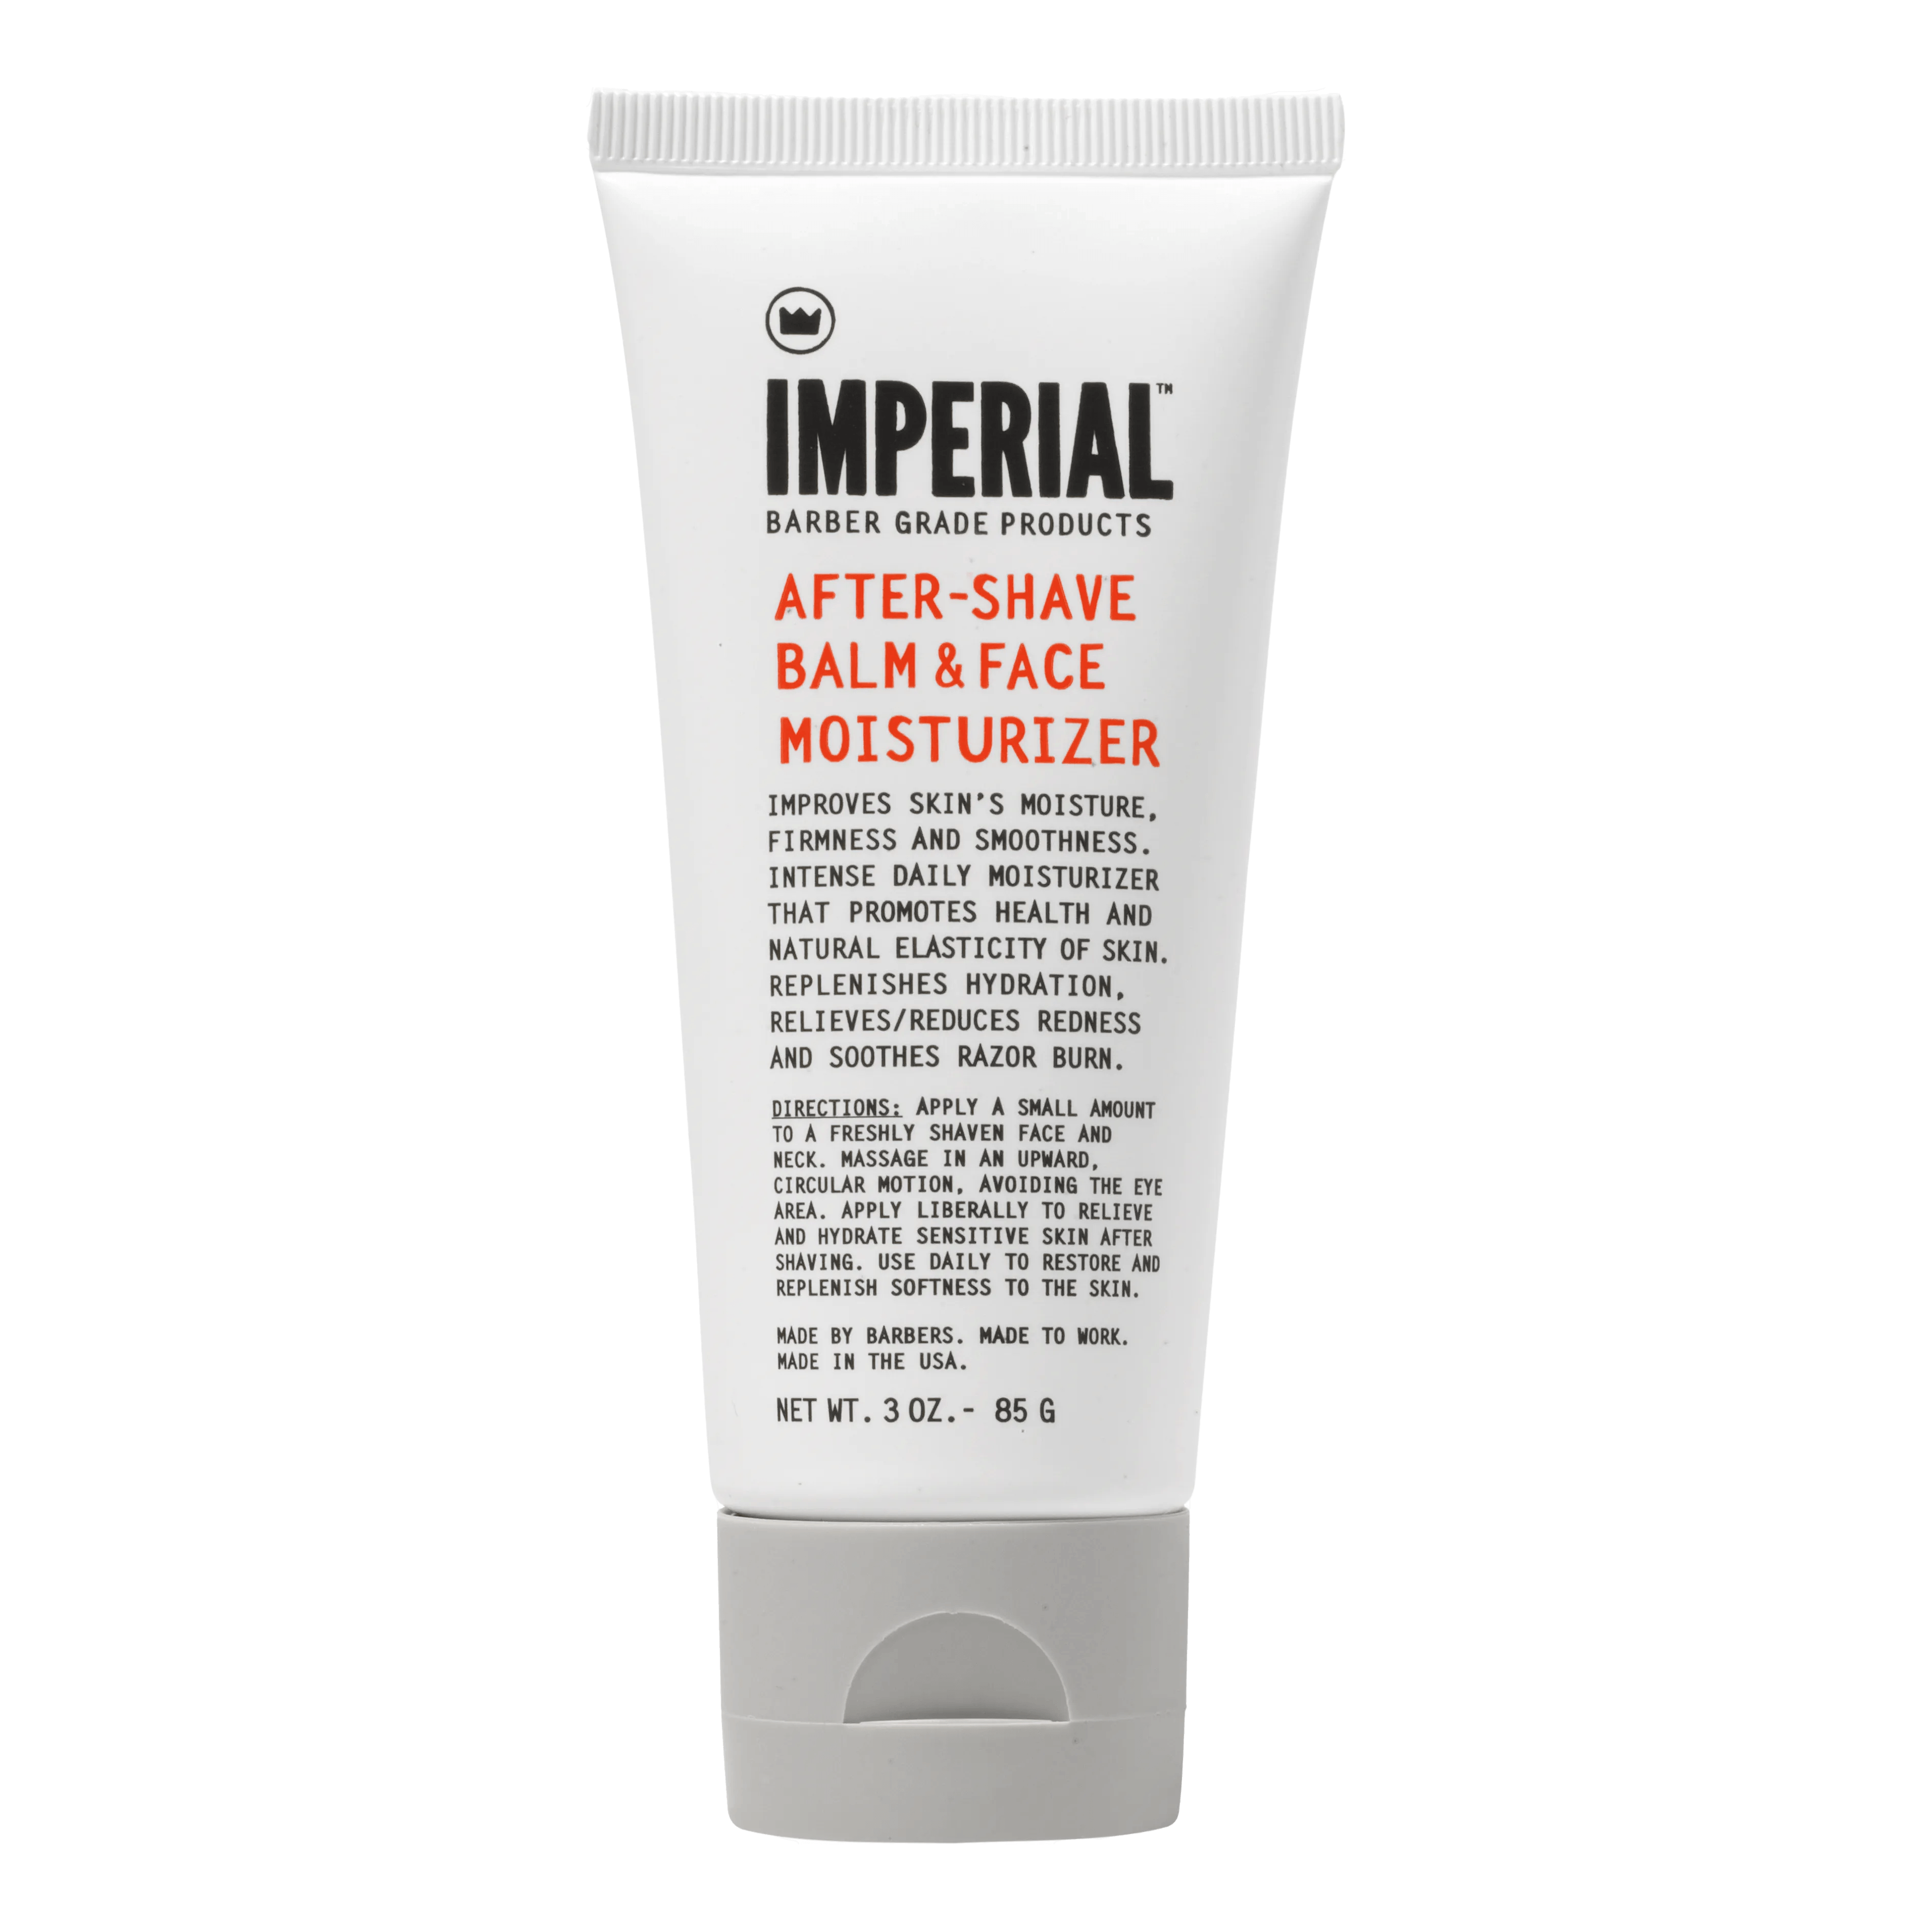 Imperial Barber Products After-Shave Balm & Facial Moisturizer